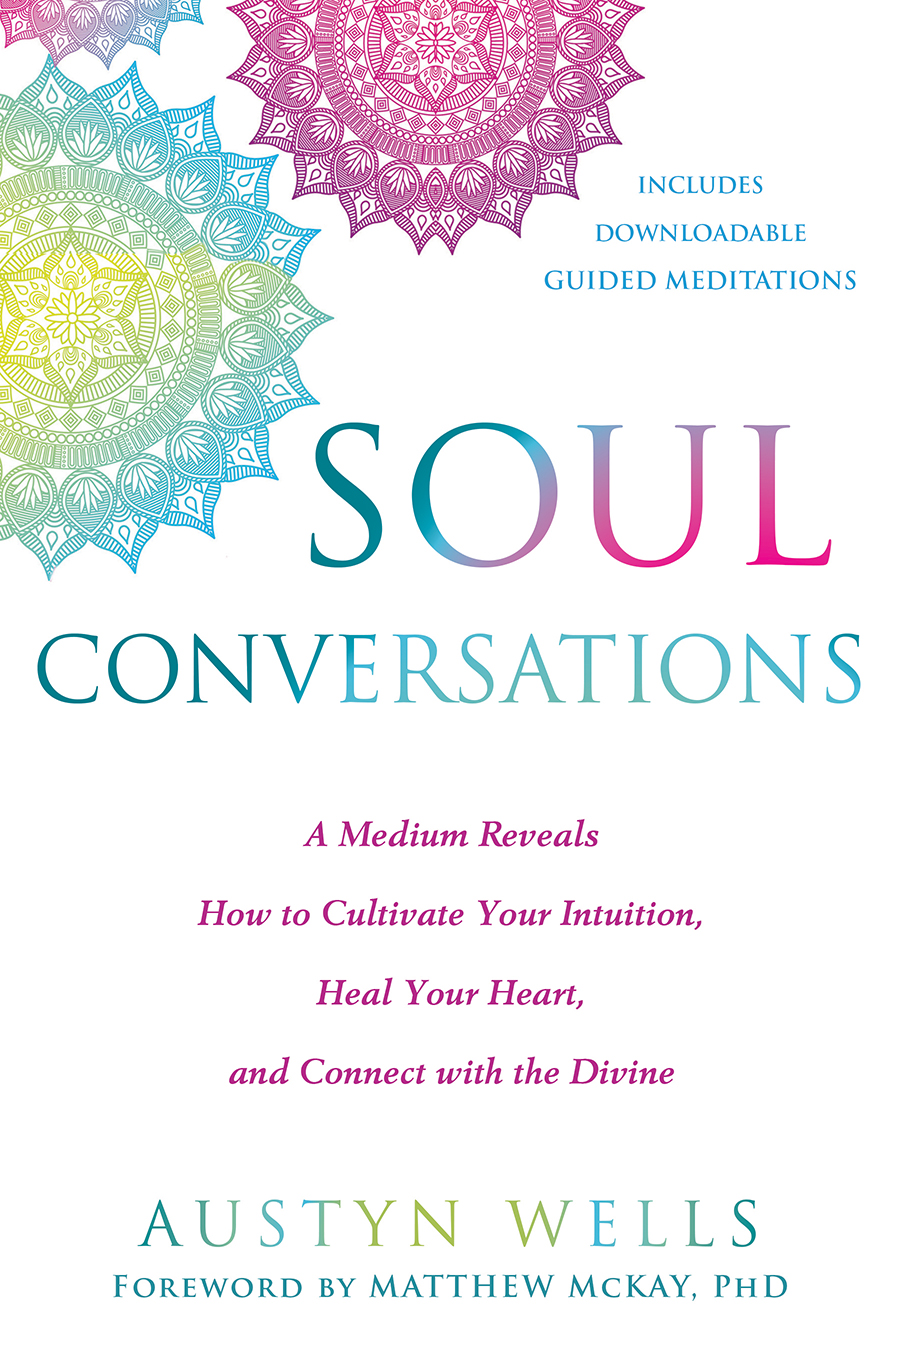 Imagen de portada para Soul Conversations [electronic resource] : A Medium Reveals How to Cultivate Your Intuition, Heal Your Heart, and Connect with the Divine